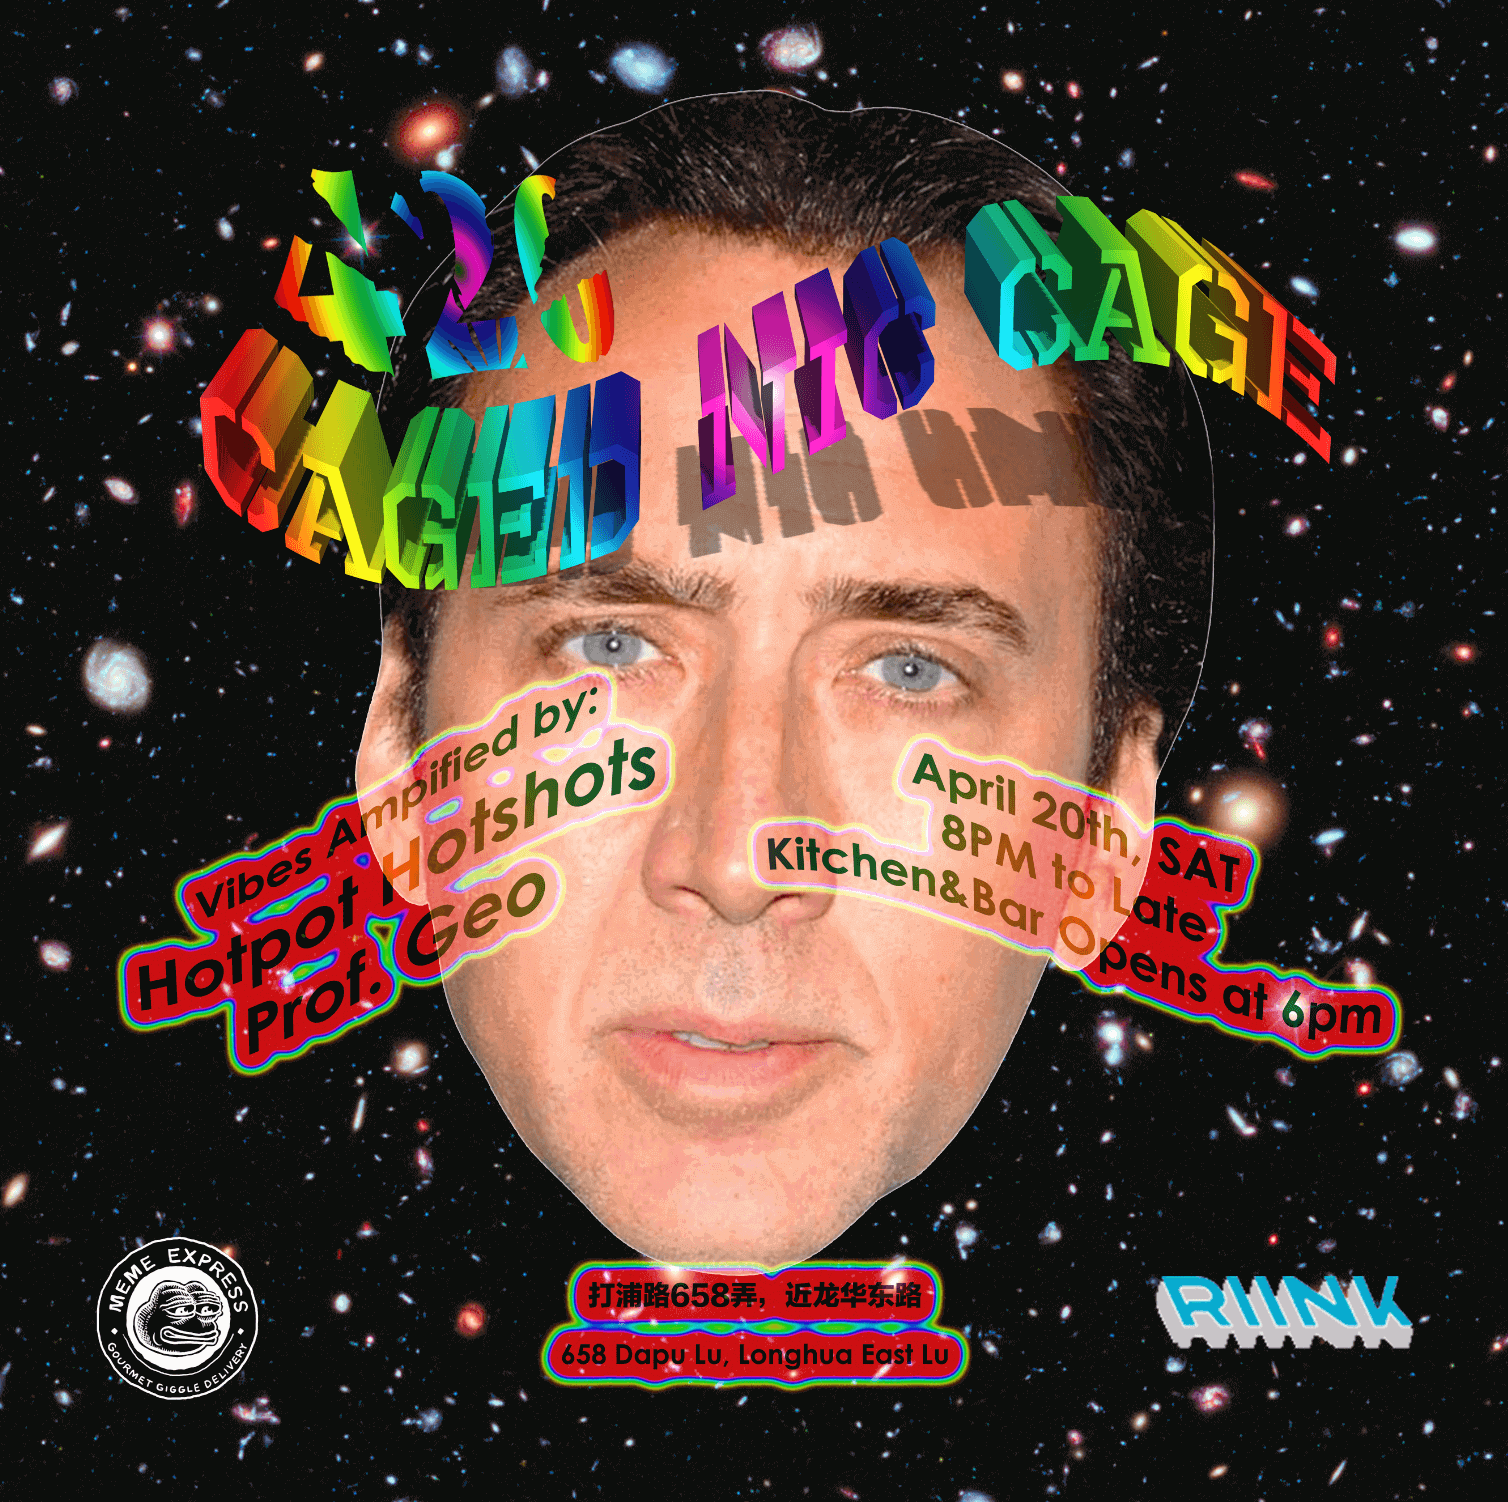 Caged-Nic-Cage-Riink-420-1-1-1-1-1-1-.png